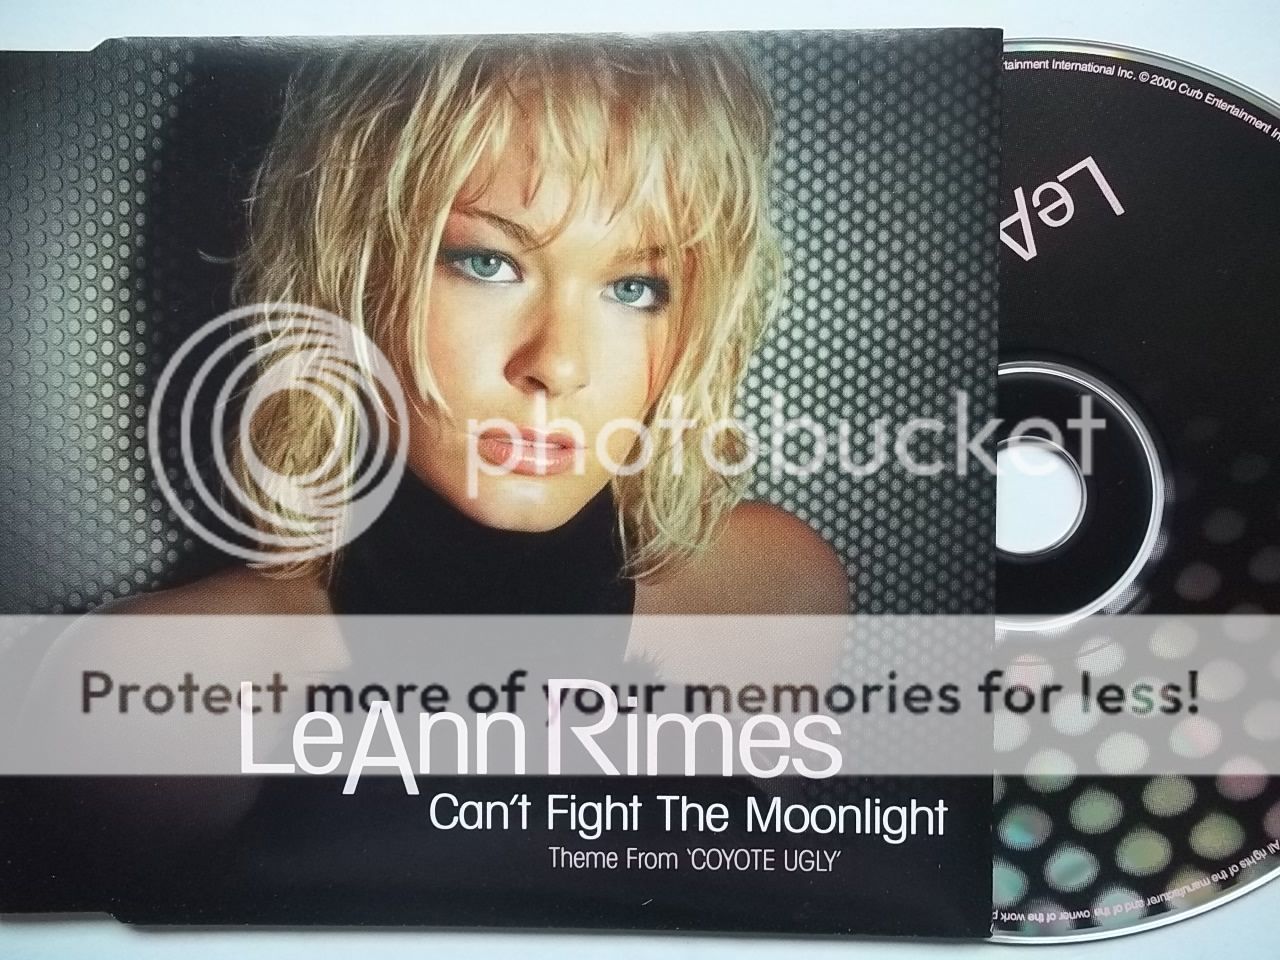 Can't fight the moonlight by Leann Rimes, CDS with AnchorMusic - Ref